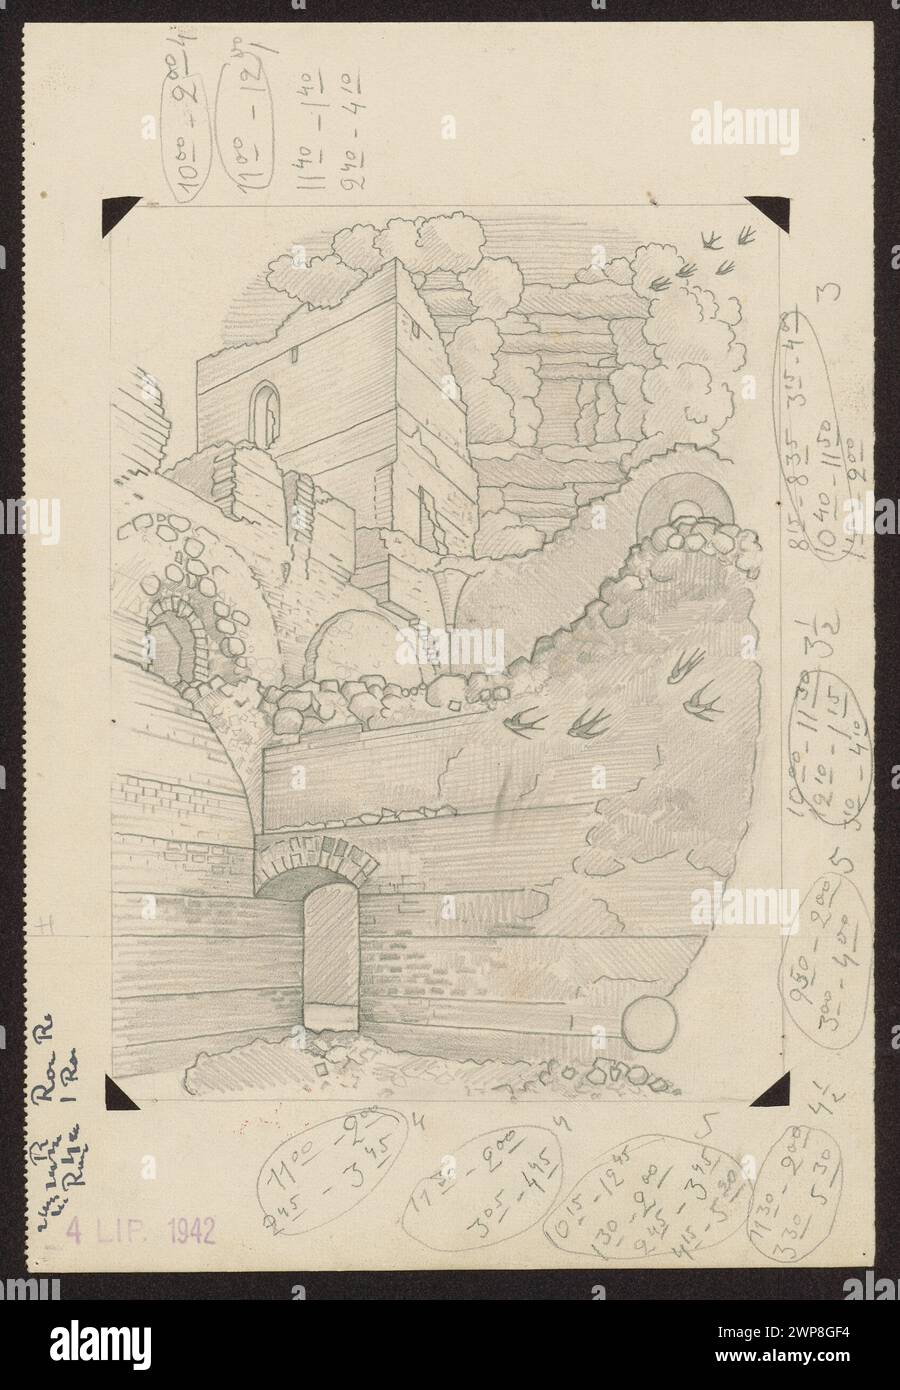 Ruins from shindles, sketches for graphics from the TRAKI series; Romanowicz, Walenty; 1941-1944 (1941-00-00-1944-00-00); Stock Photo